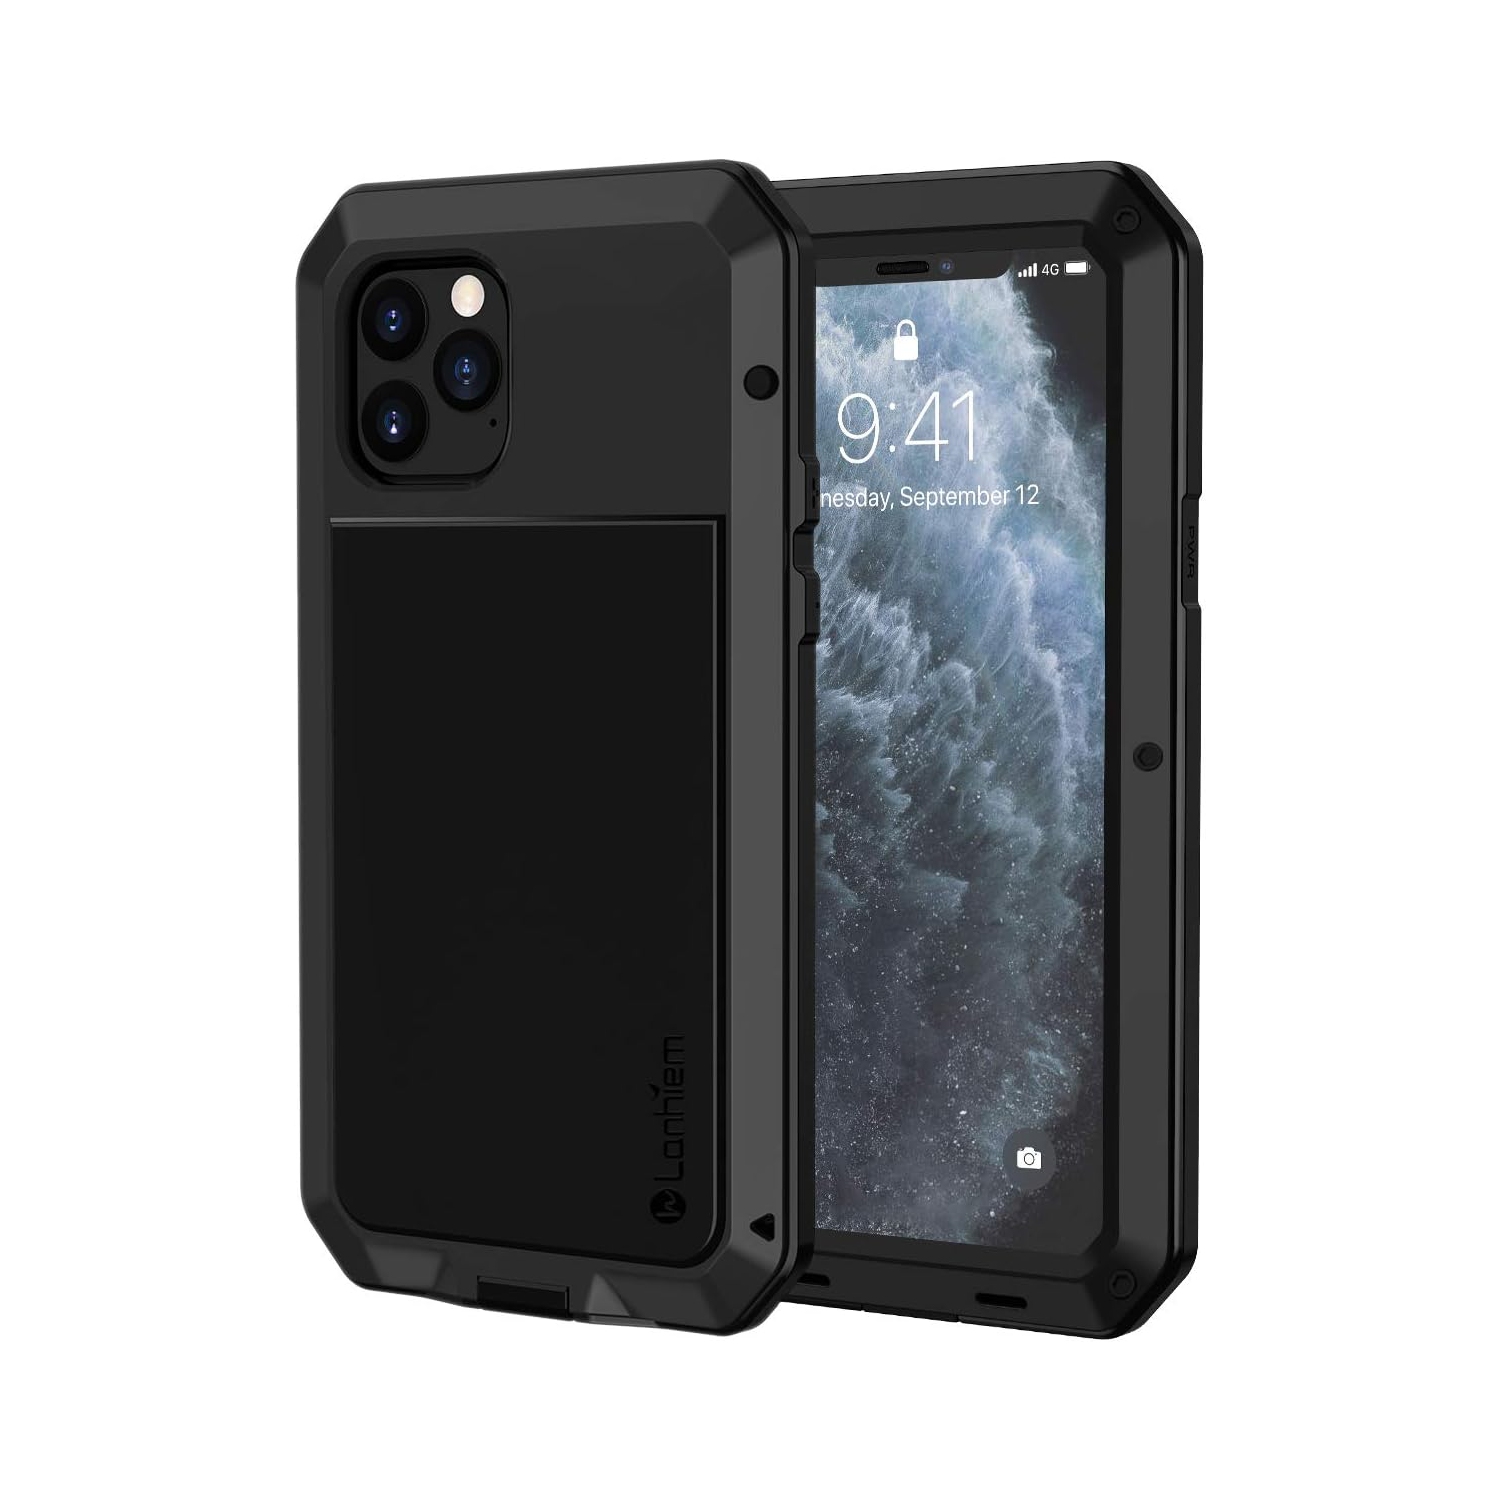 iPhone 11 Pro Max Case, Heavy Duty Shockproof [Tough Armour] Metal Case with Built-in Screen Protector, 360